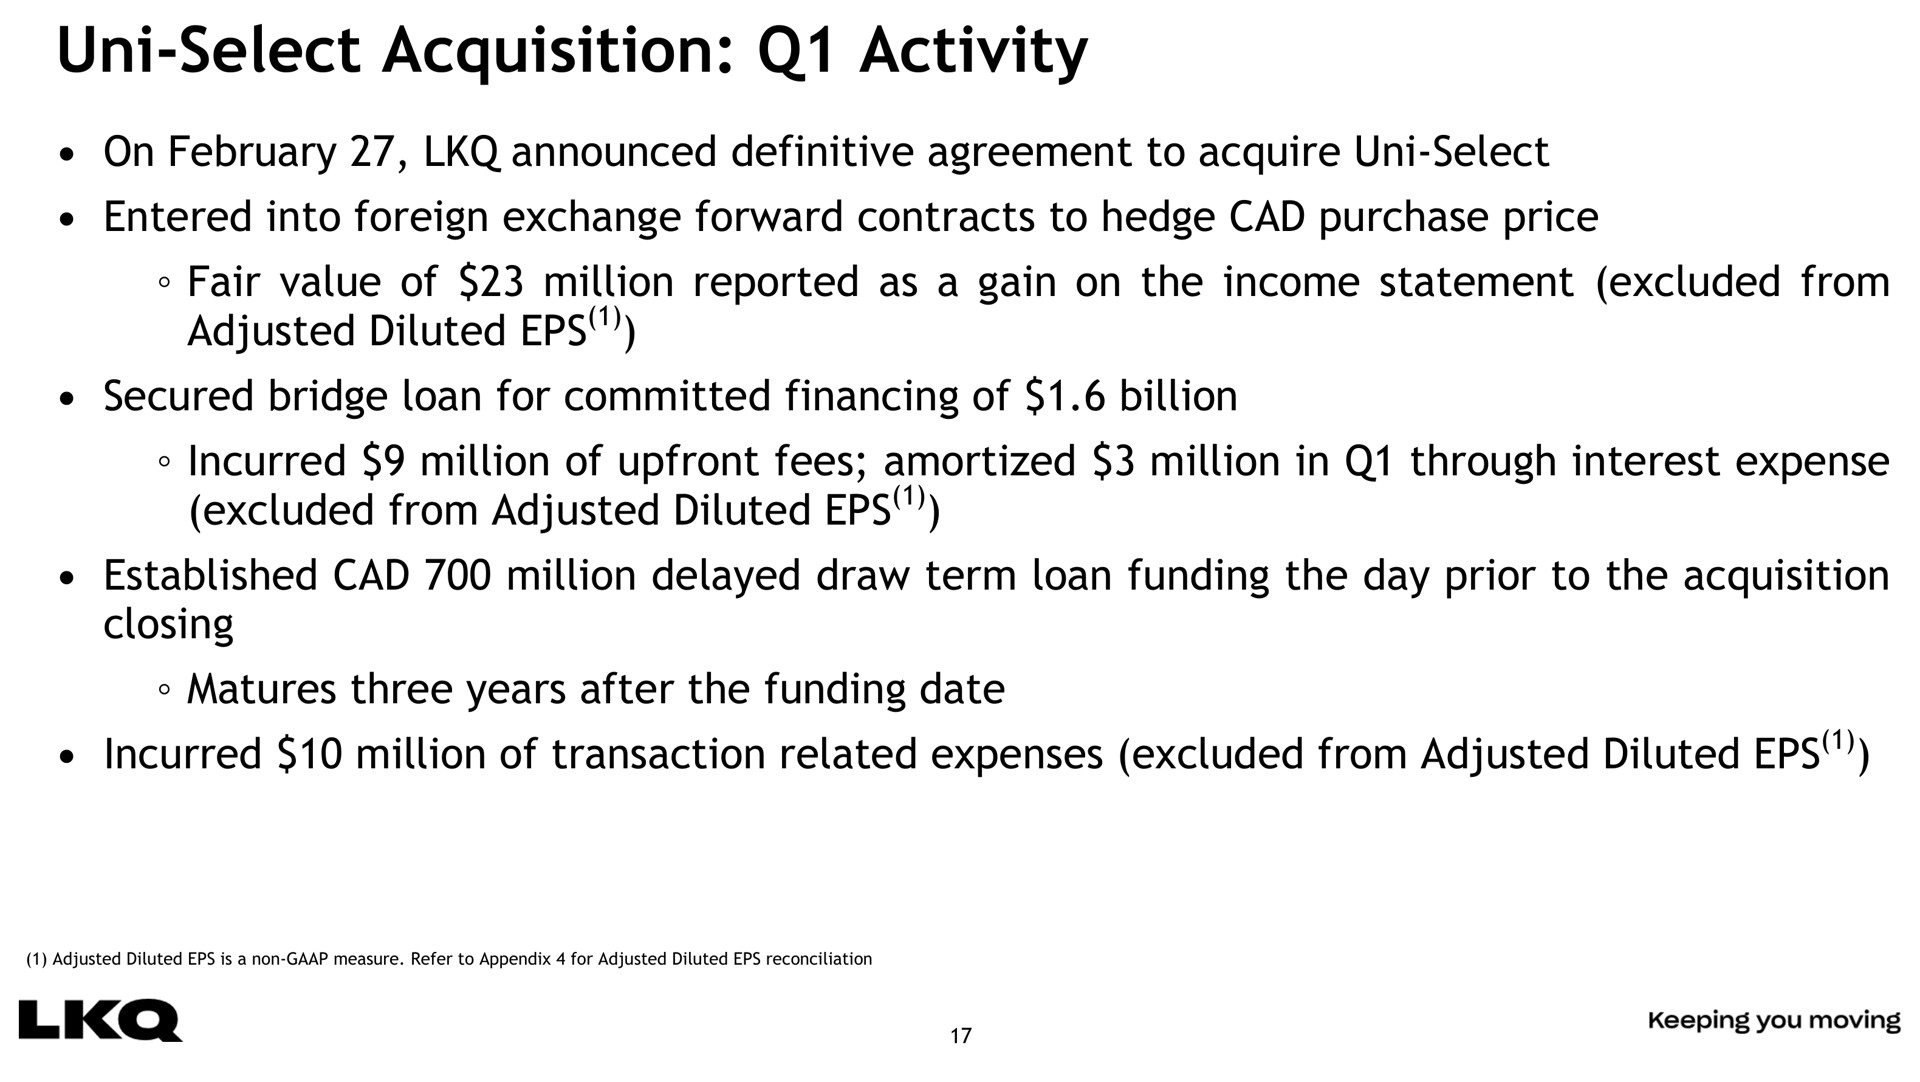 select acquisition activity on announced definitive agreement to acquire select entered into foreign exchange forward contracts to hedge cad purchase price fair value of million reported as a gain on the income statement excluded from adjusted diluted secured bridge loan for committed financing of billion incurred million of fees amortized million in through interest expense excluded from adjusted diluted established cad million delayed draw term loan funding the day prior to the acquisition closing matures three years after the funding date incurred million of transaction related expenses excluded from adjusted diluted | LKQ